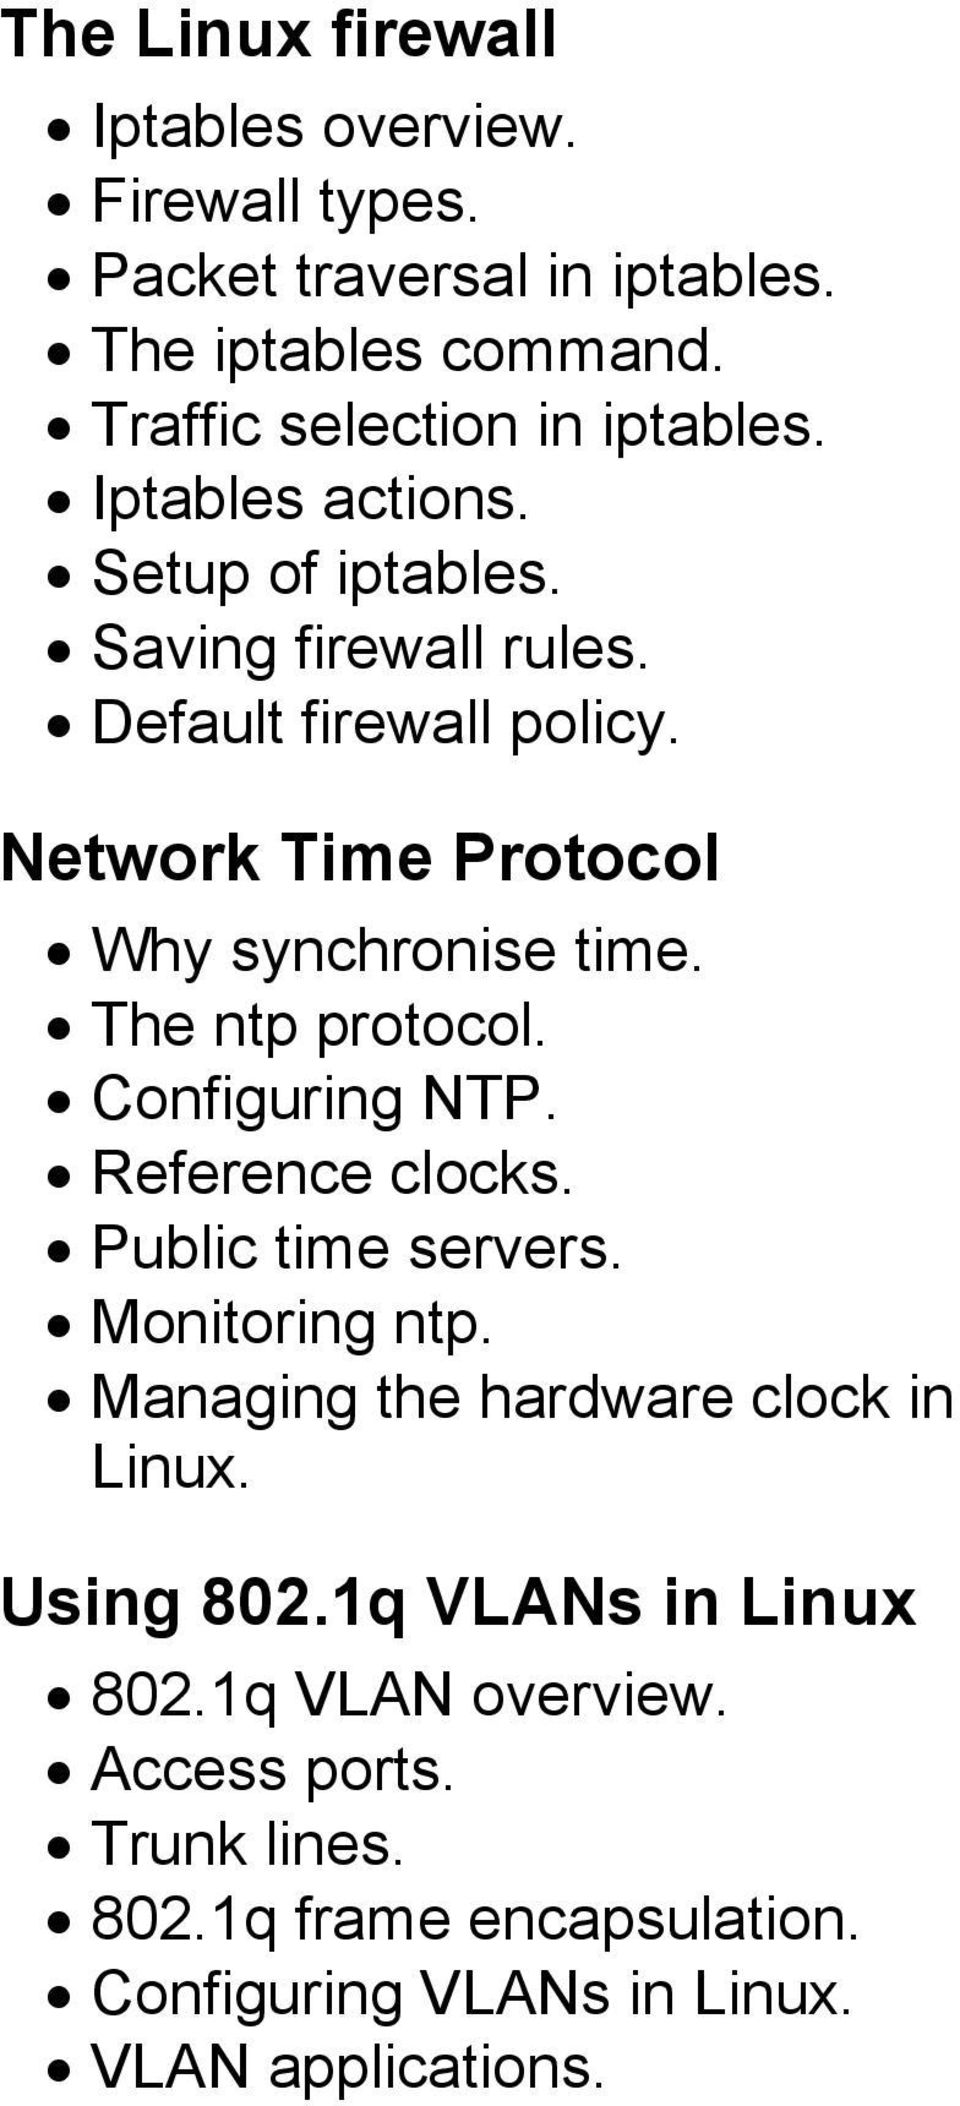 The ntp protocol. Configuring NTP. Reference clocks. Public time servers. Monitoring ntp. Managing the hardware clock in Linux.